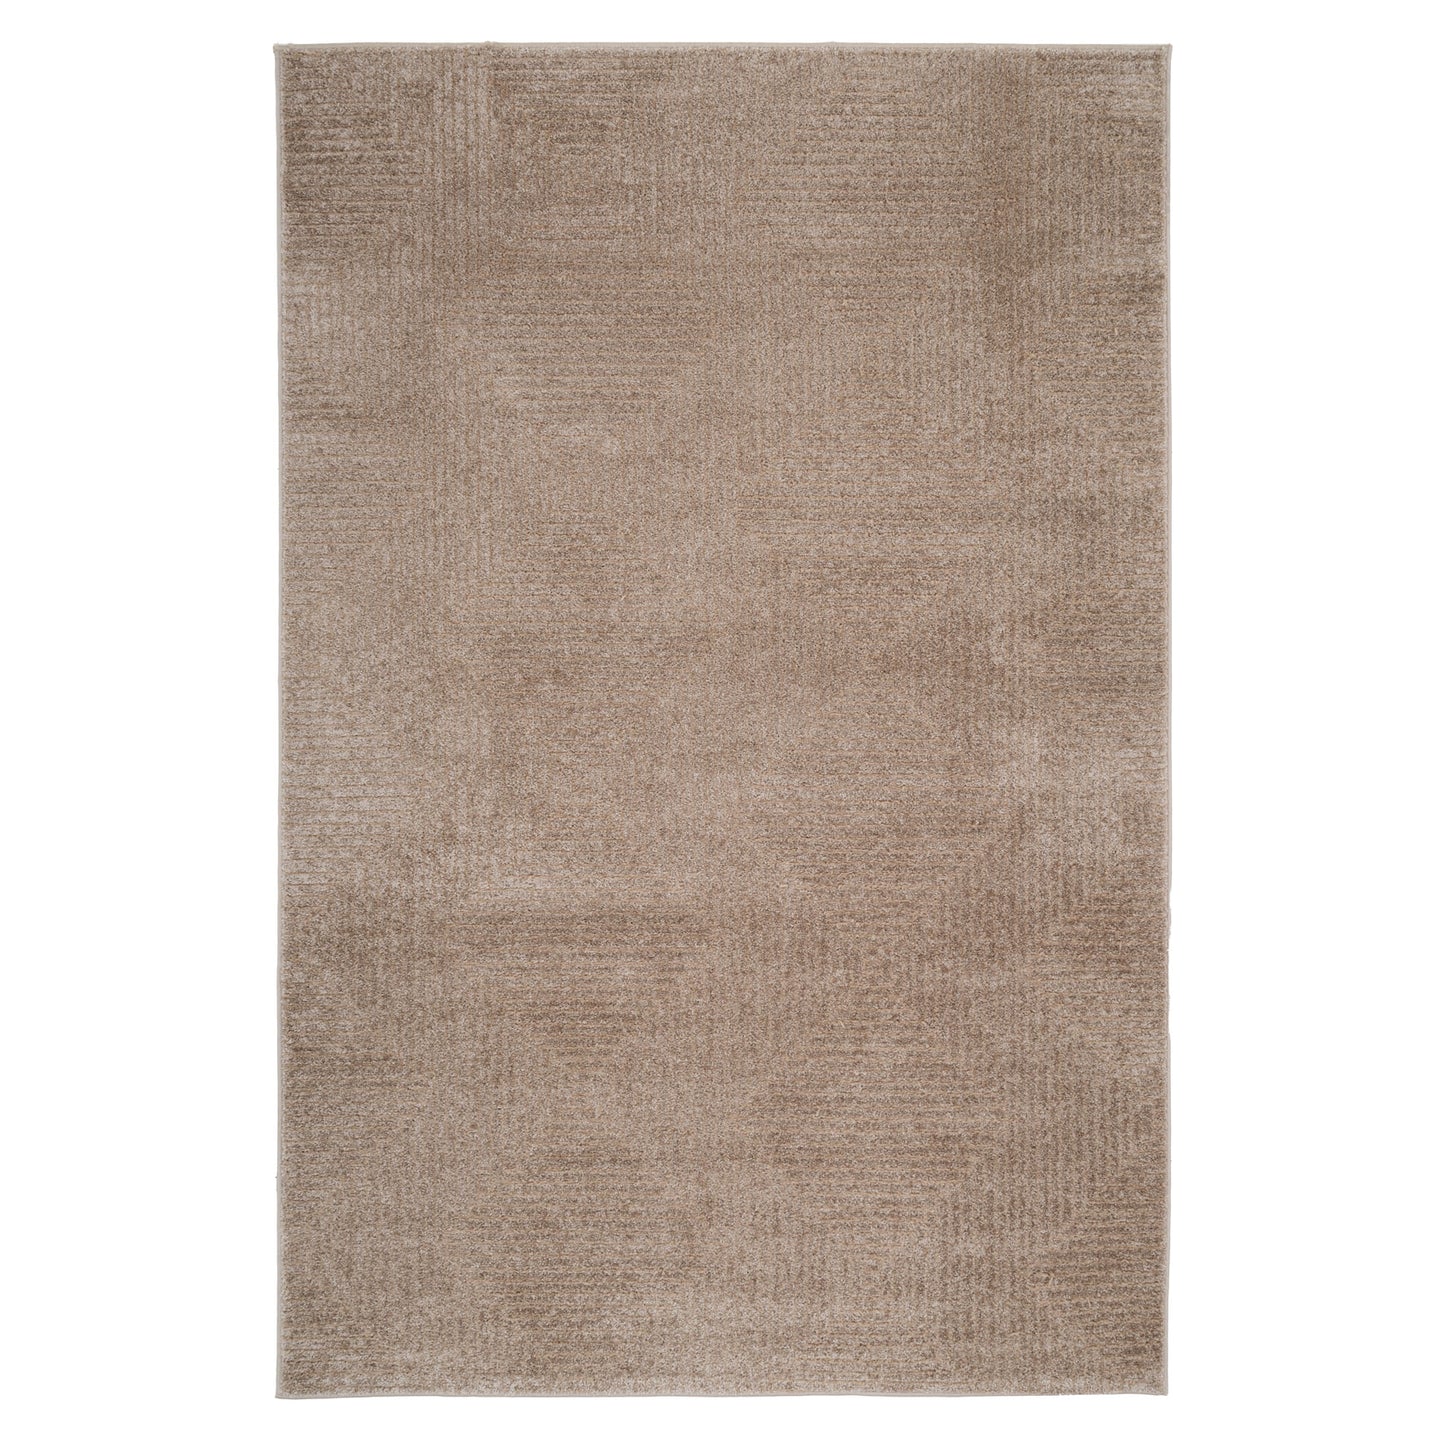 Carved Oatmeal Area Rug - Clement